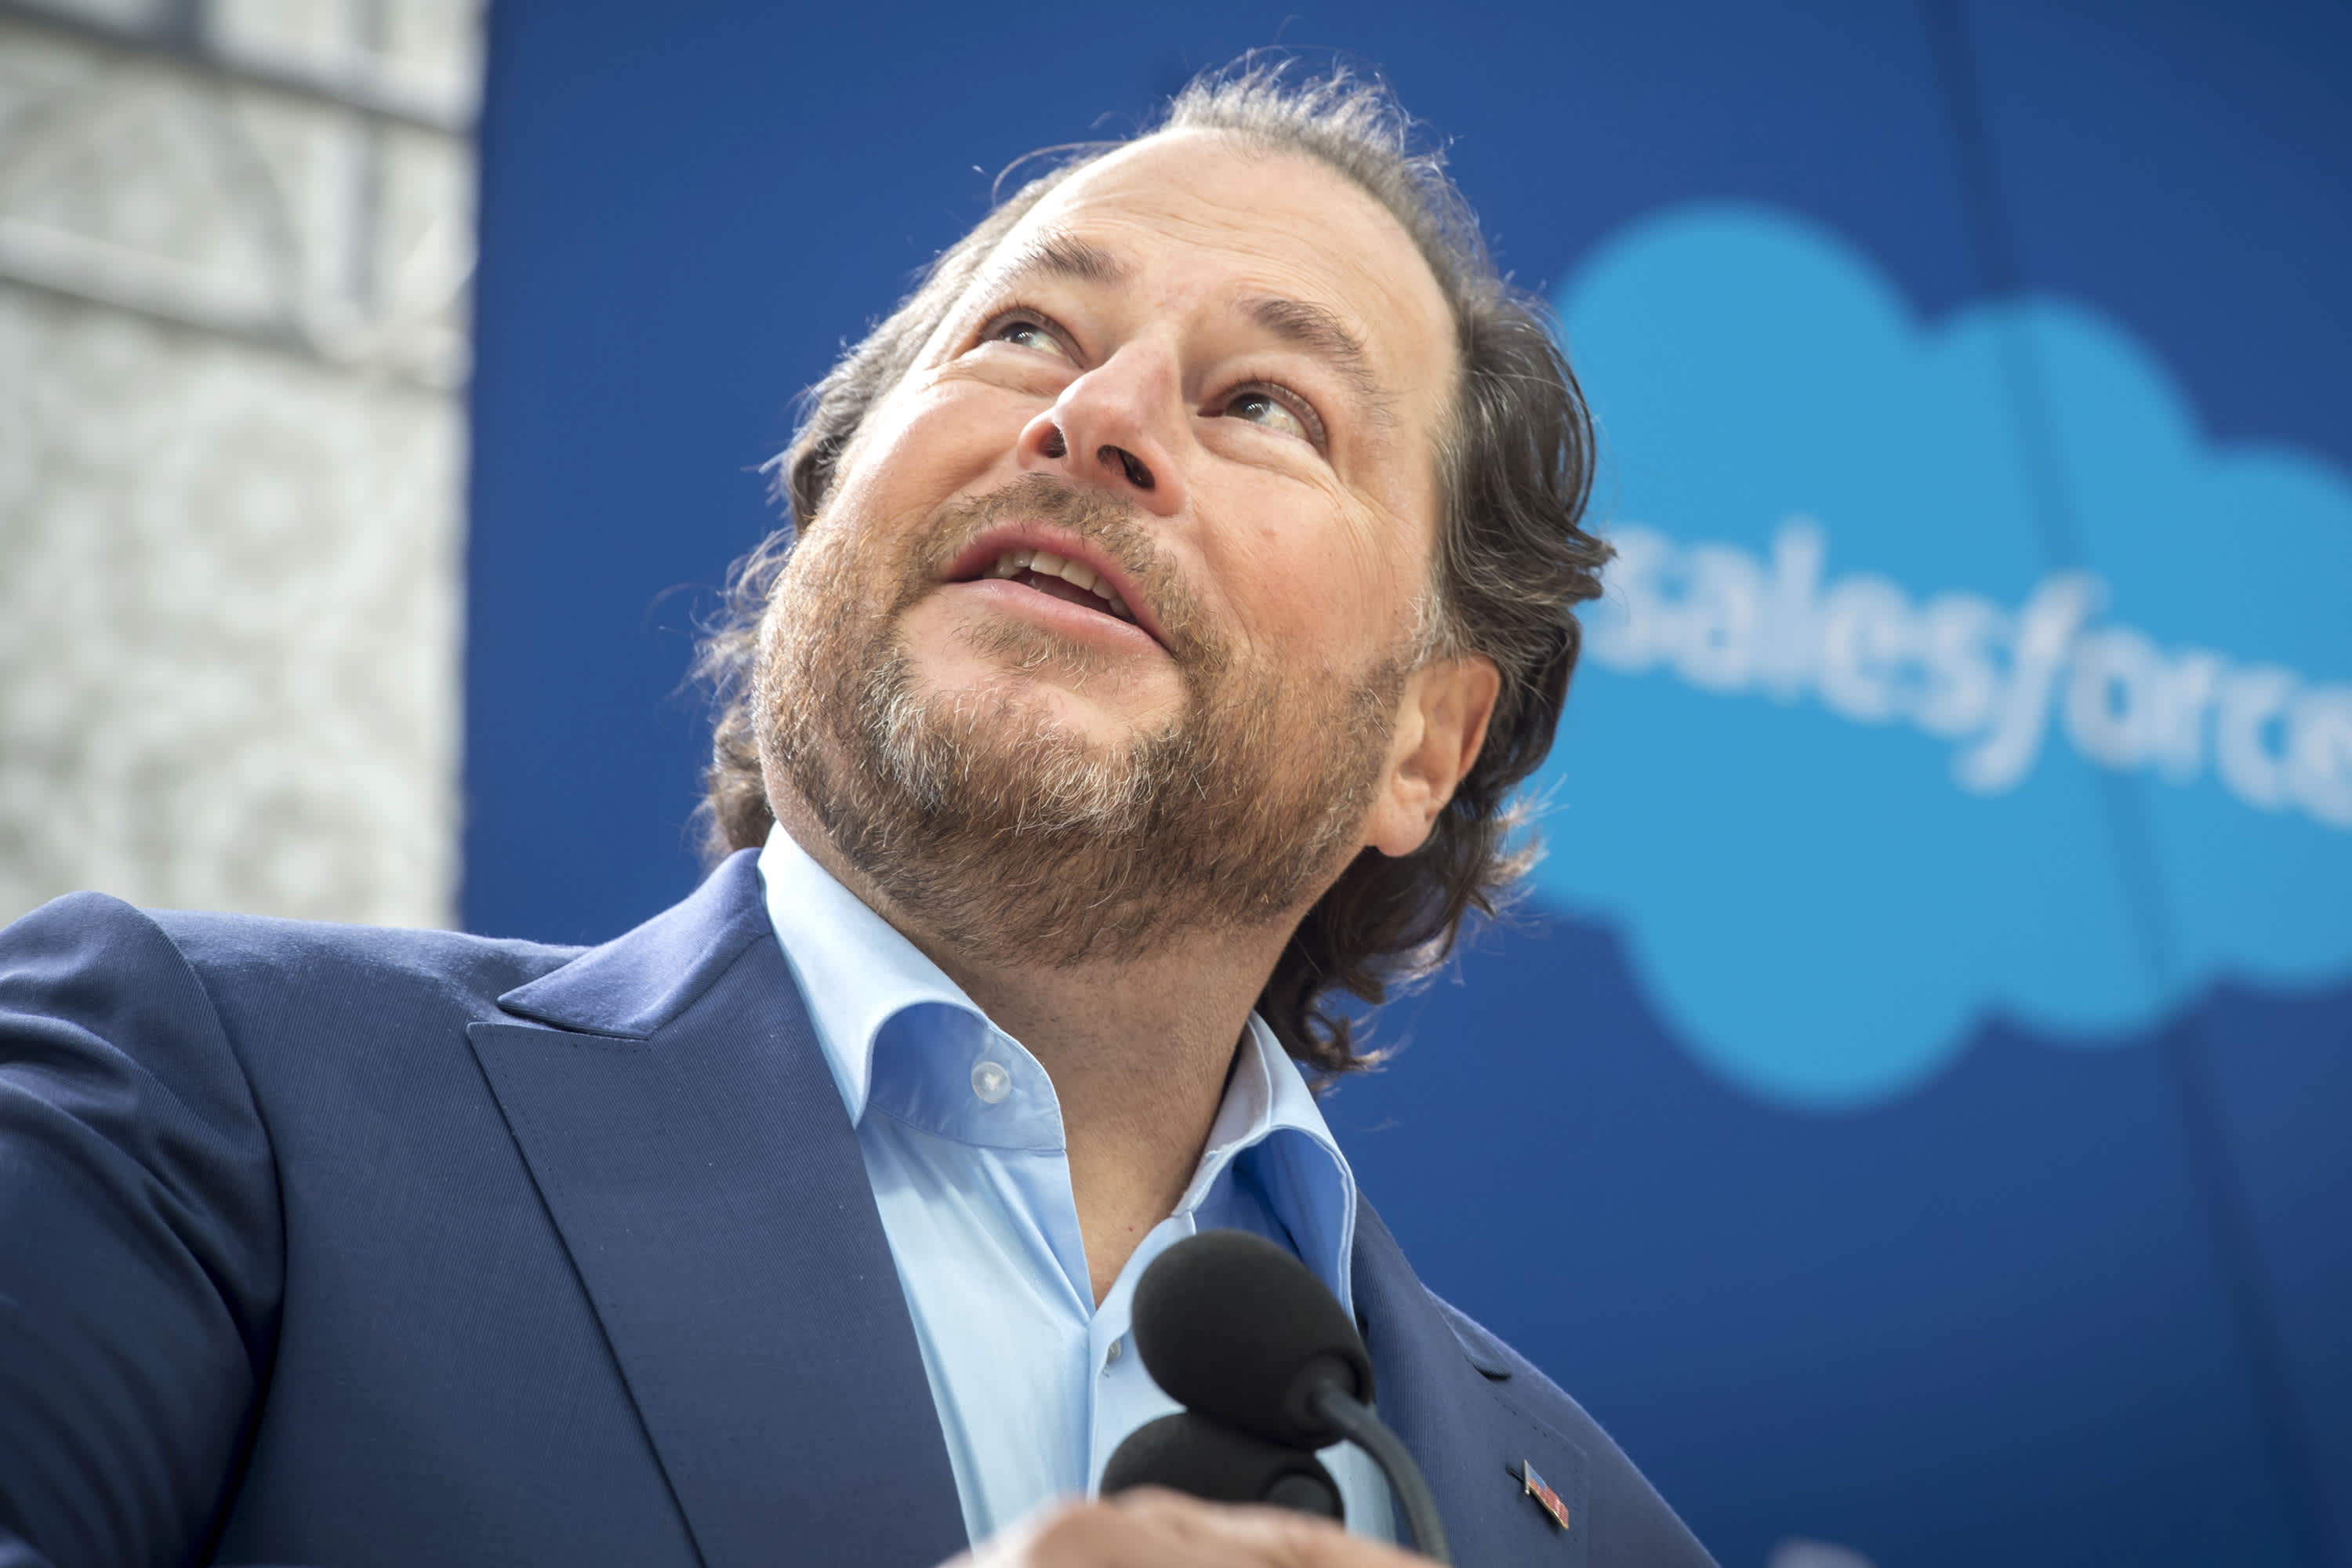 Salesforce’s Benioff says 50-60% of employees likely to work from home